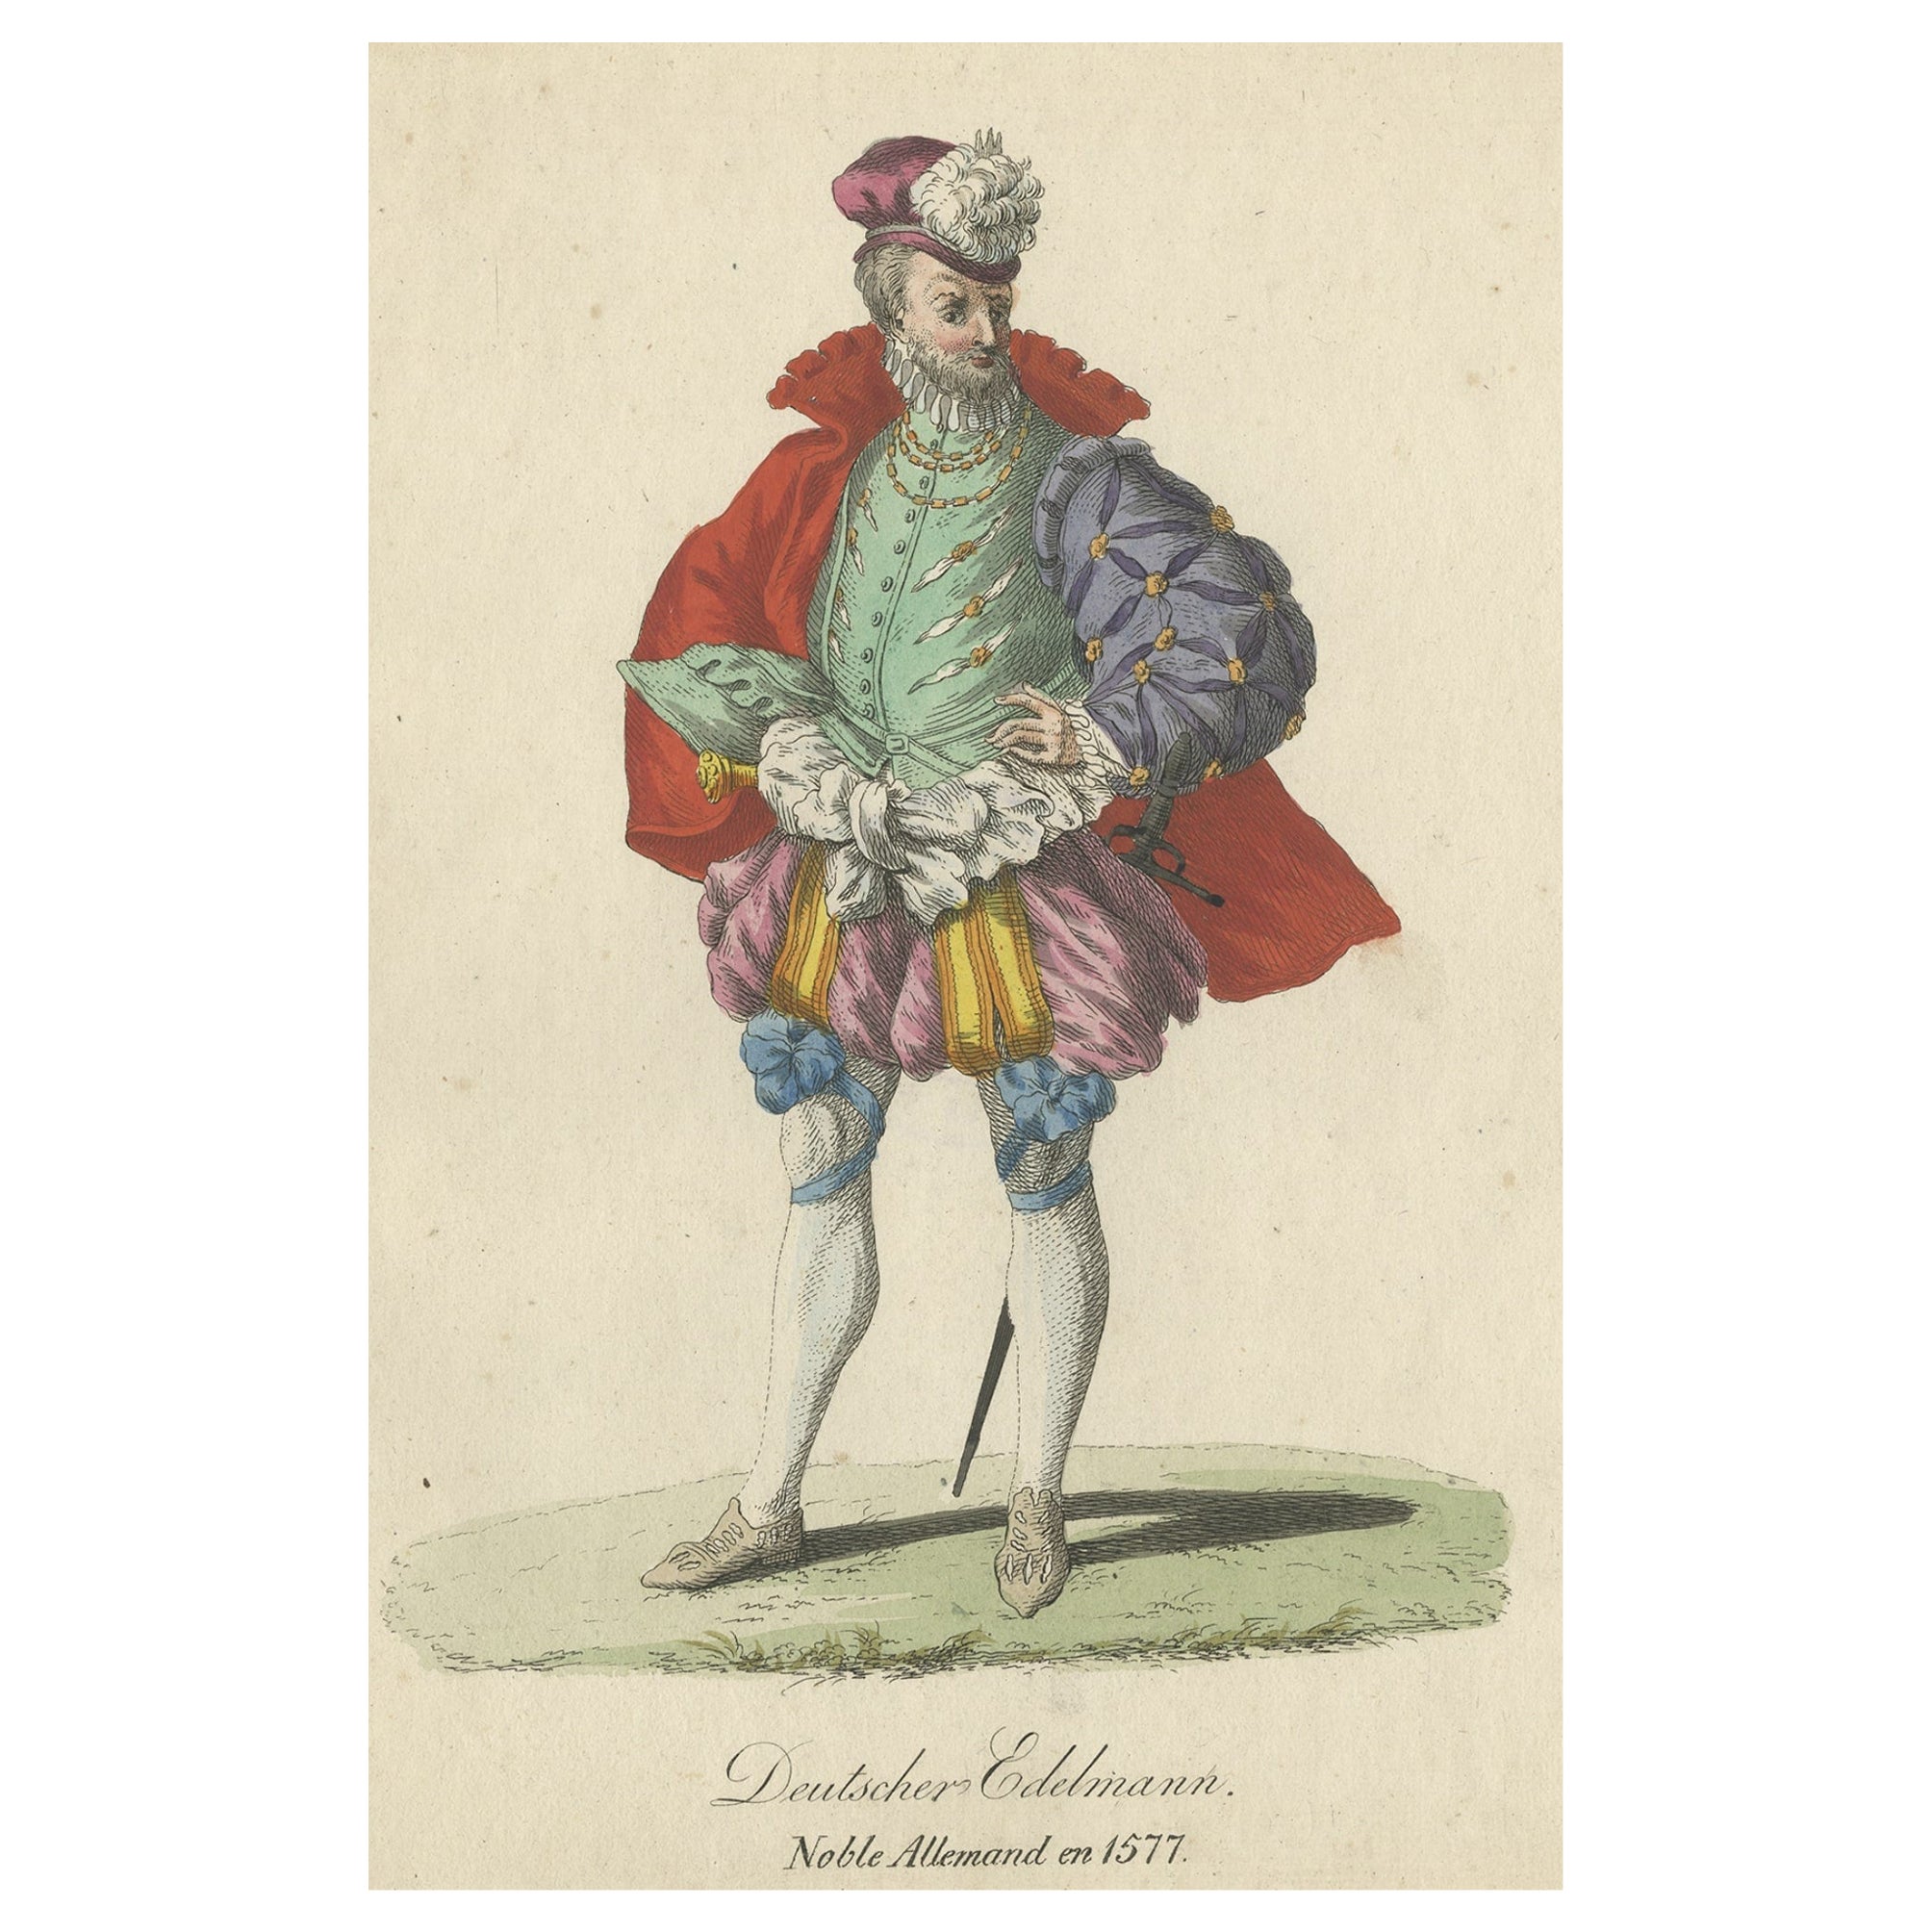 Original Hand-Colored Engraving of a 16th Century German Nobleman, 1805